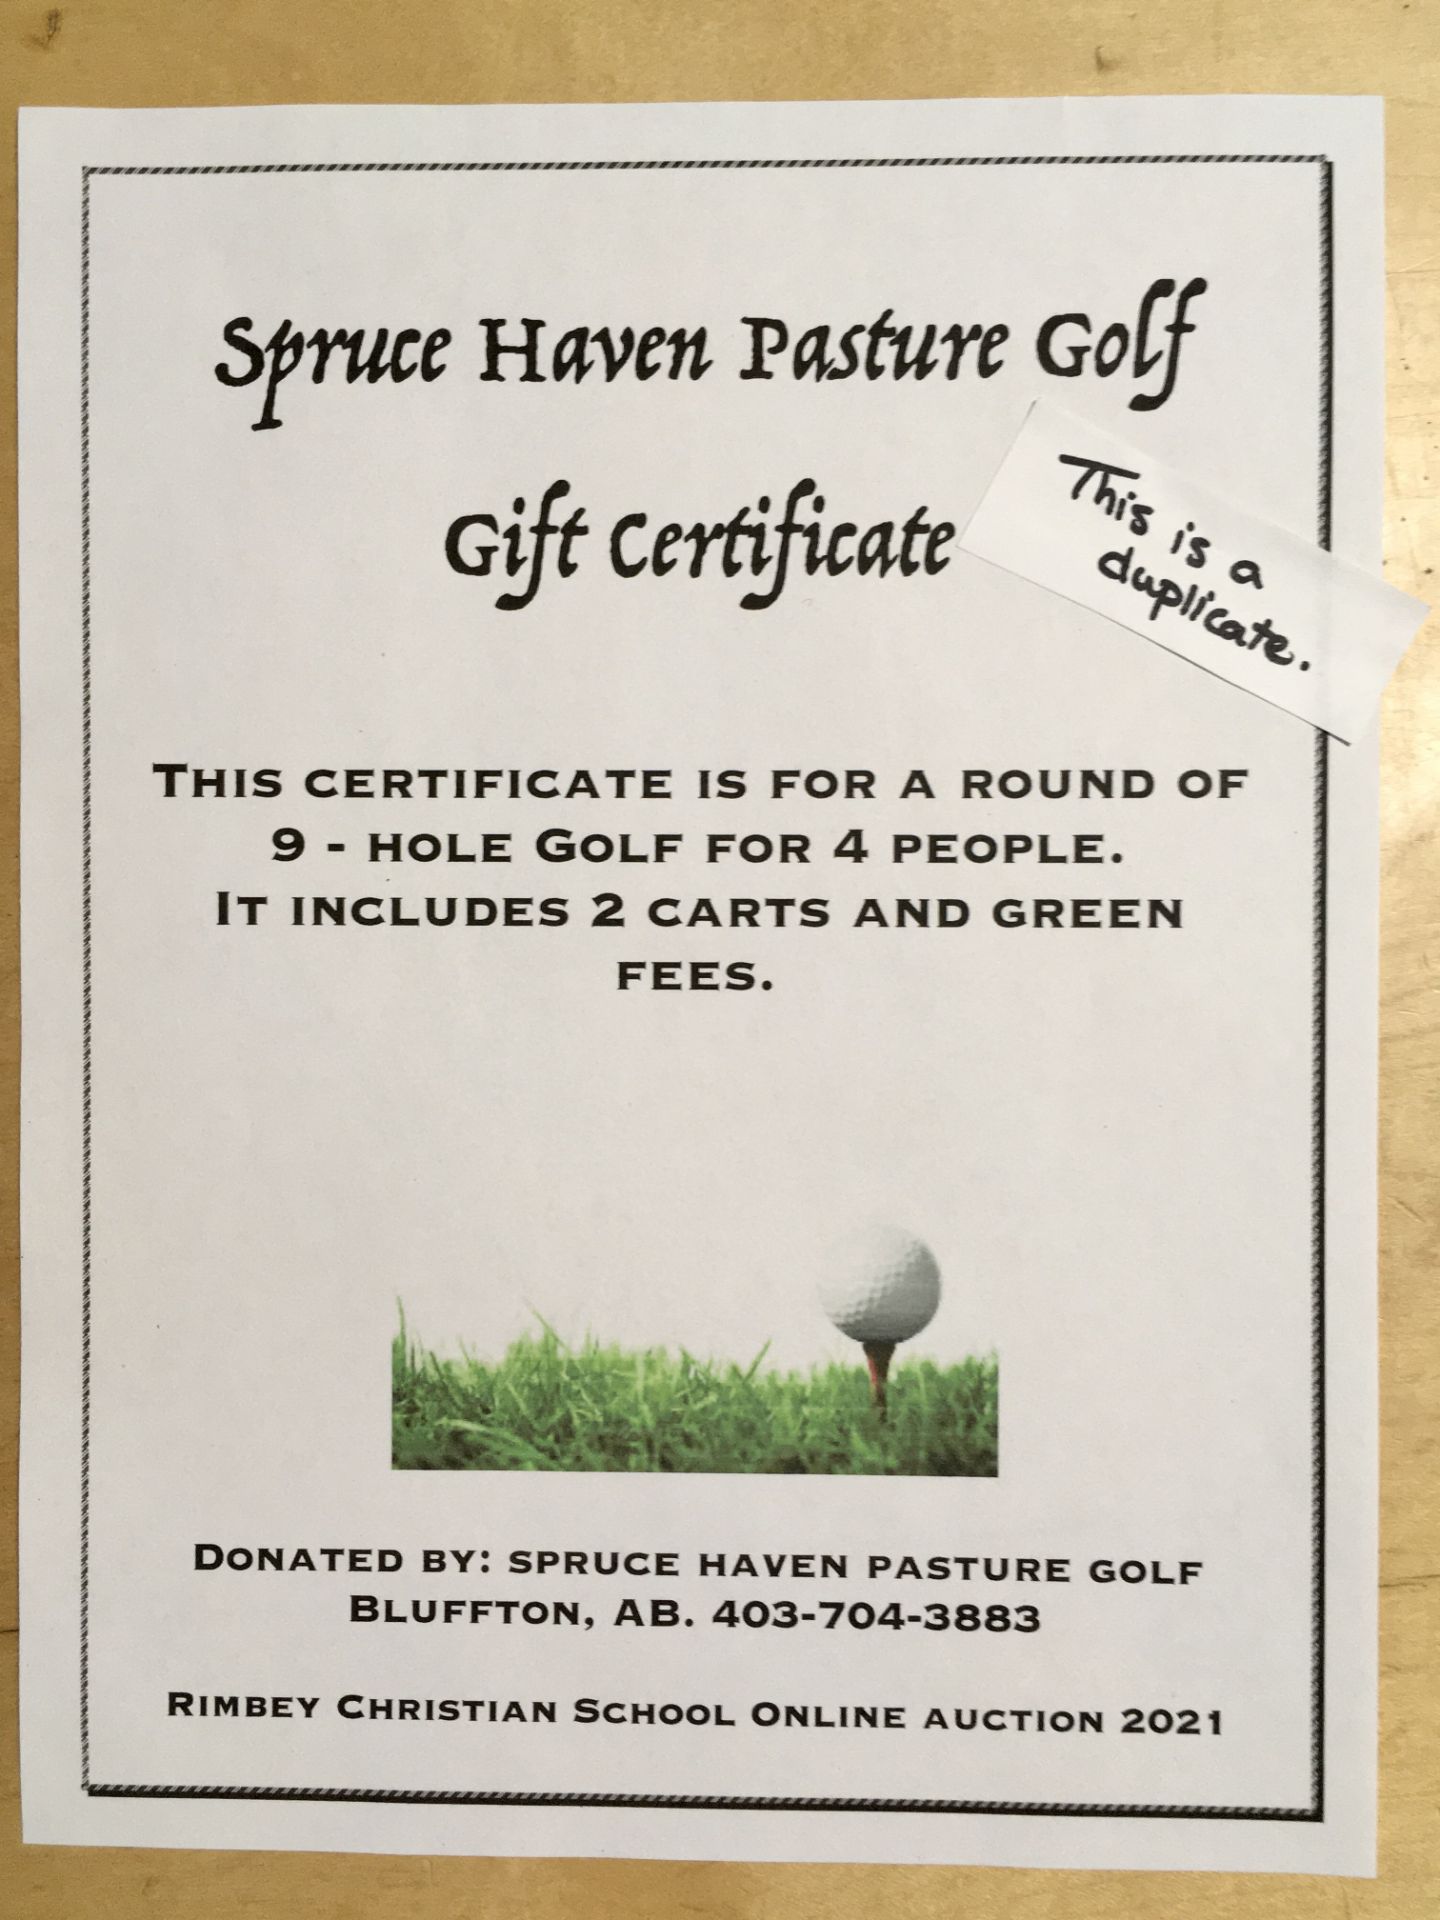 SPRUCE HAVEN PASTURE GOLF GIFT CERTIFICATE Certificate is for a round of 9 - hole golf for 4 people.